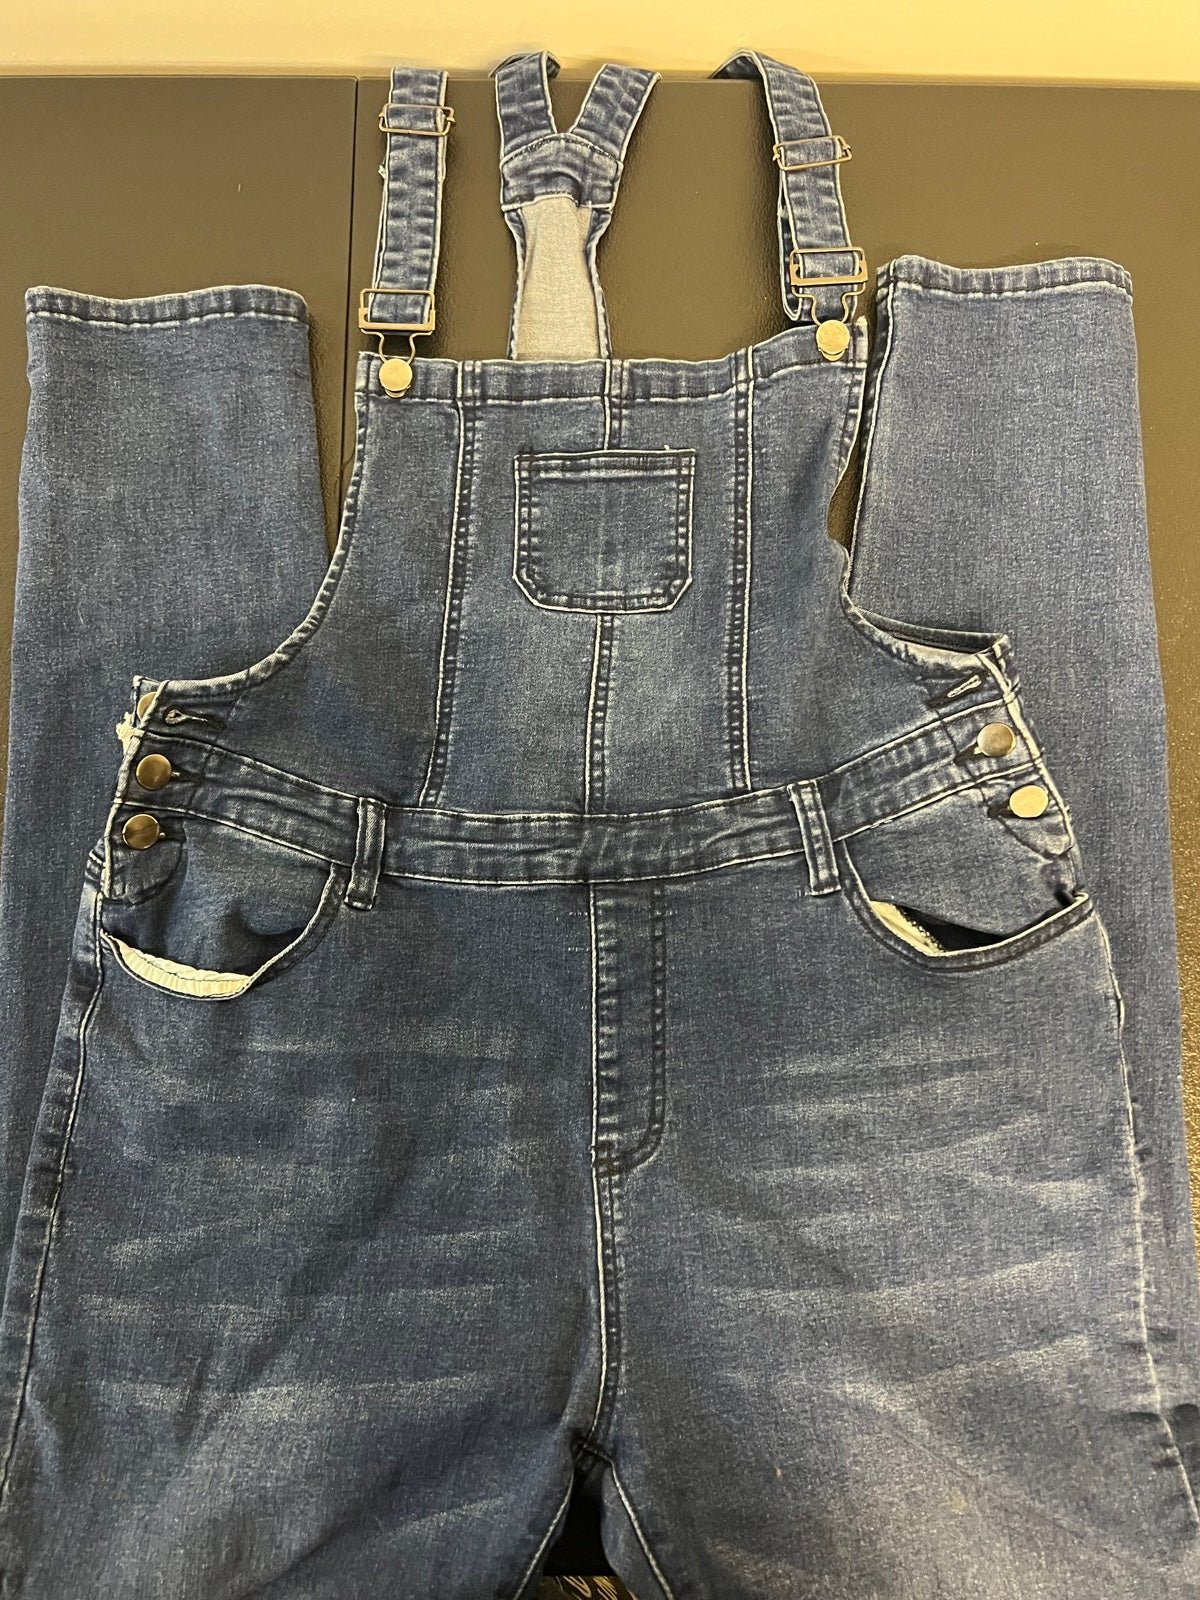 Amazing Cute Fitted Overalls blue Jean Size 1X LGkSdW8yE hot sale